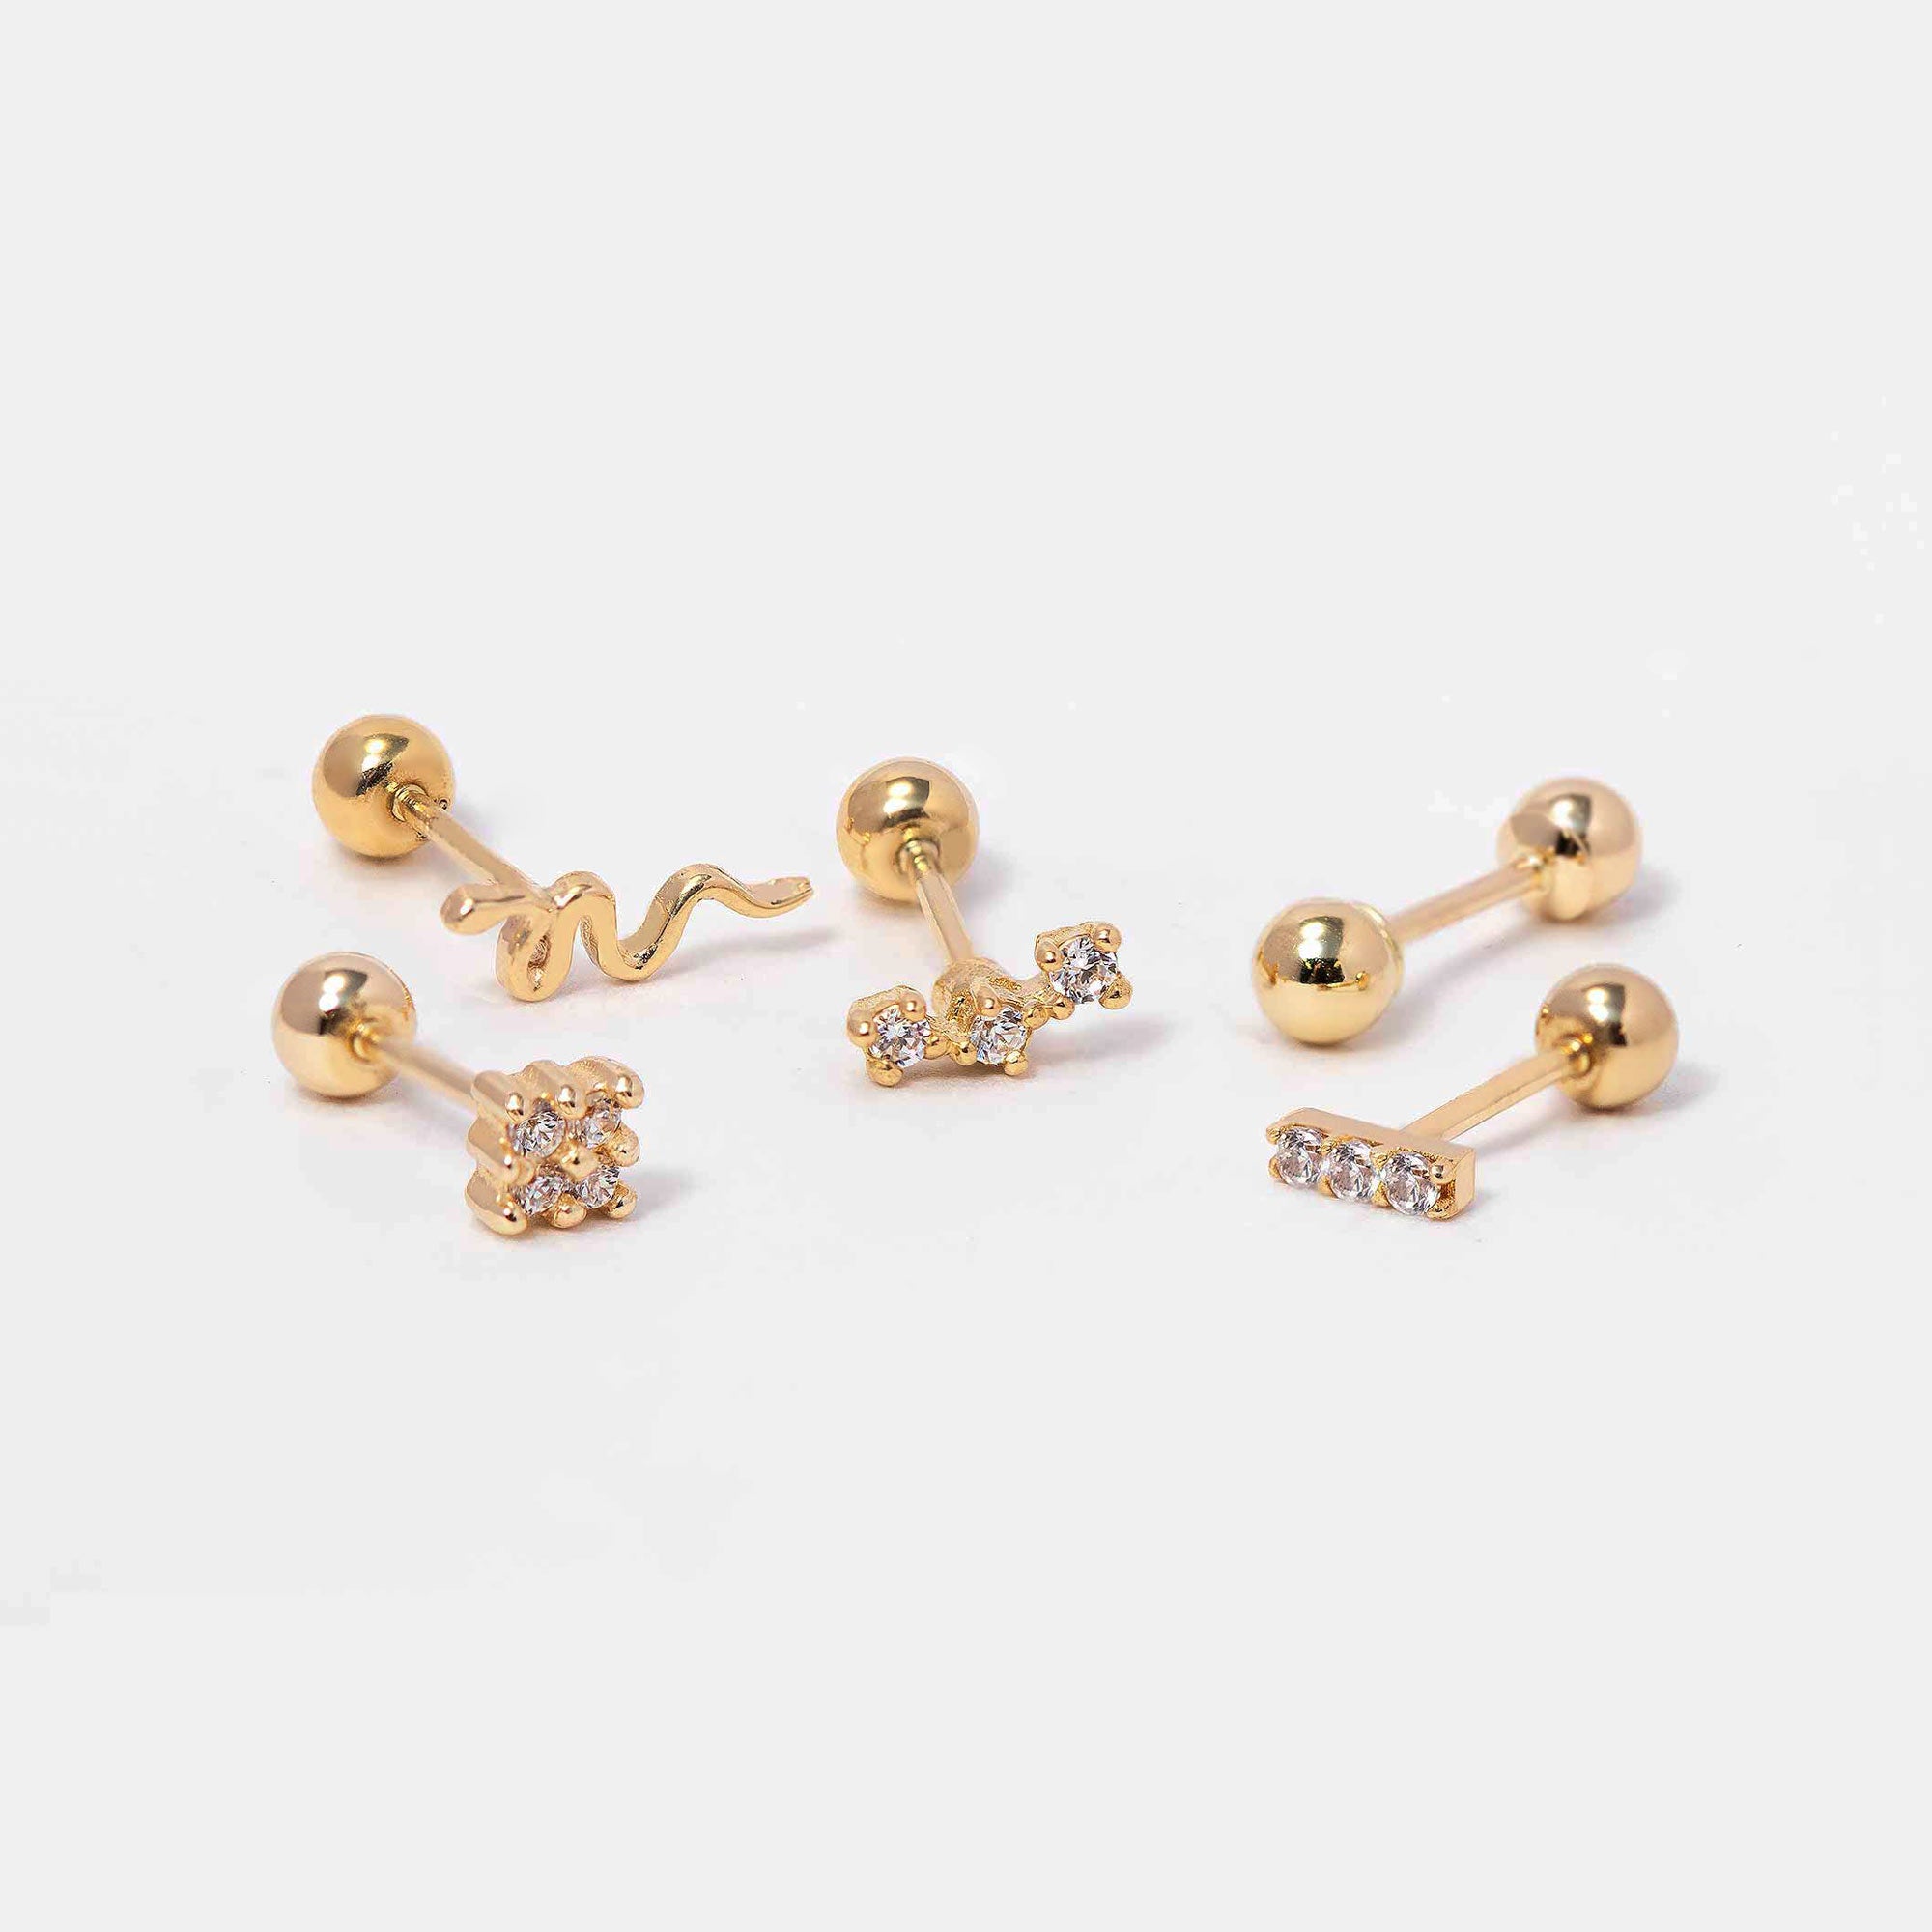 Tiny Crystal 14K Gold Single Stud Screw-on Earring, Cartilage 